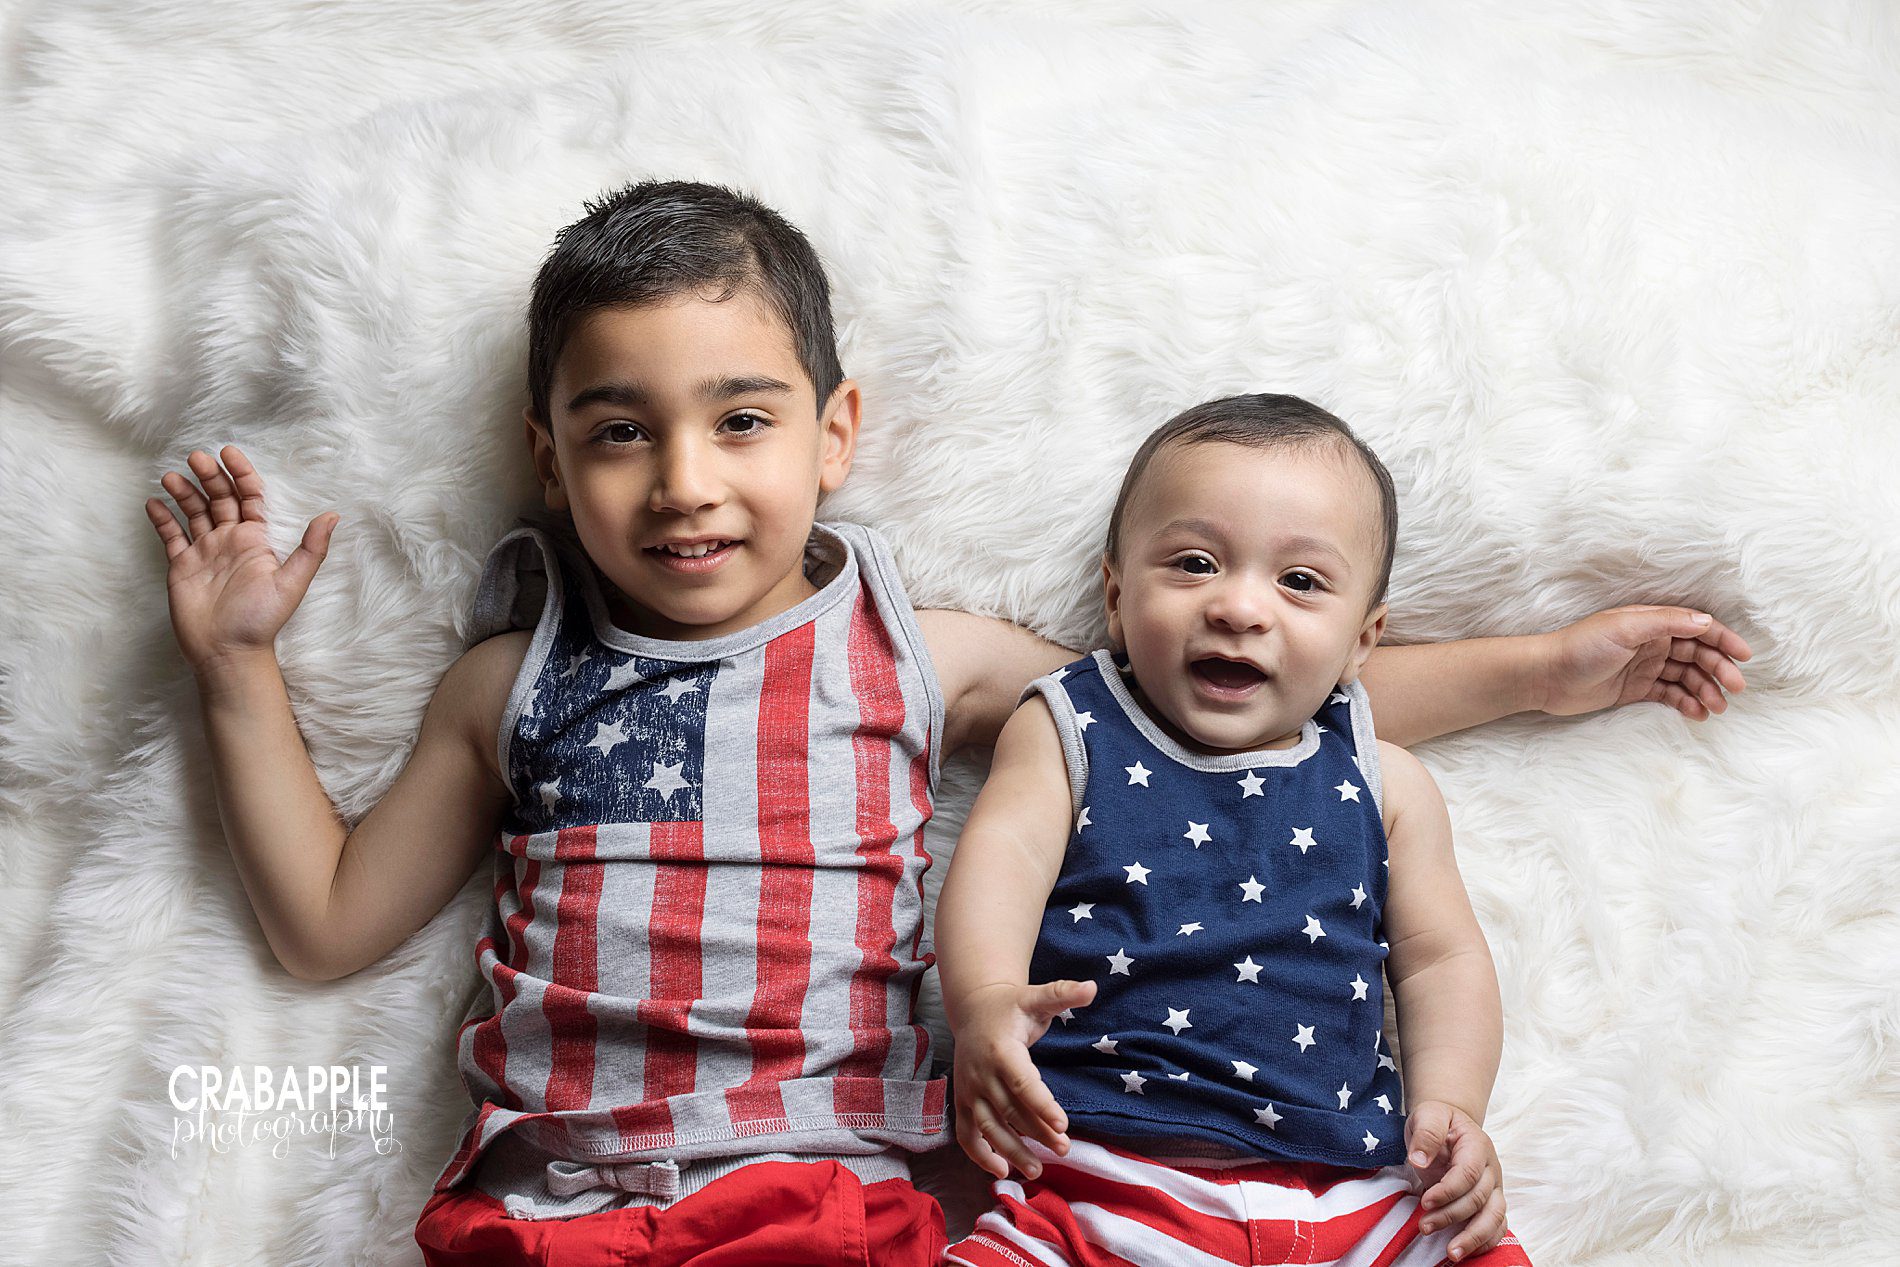 americana classic styling and outfits for child, baby, and family photography